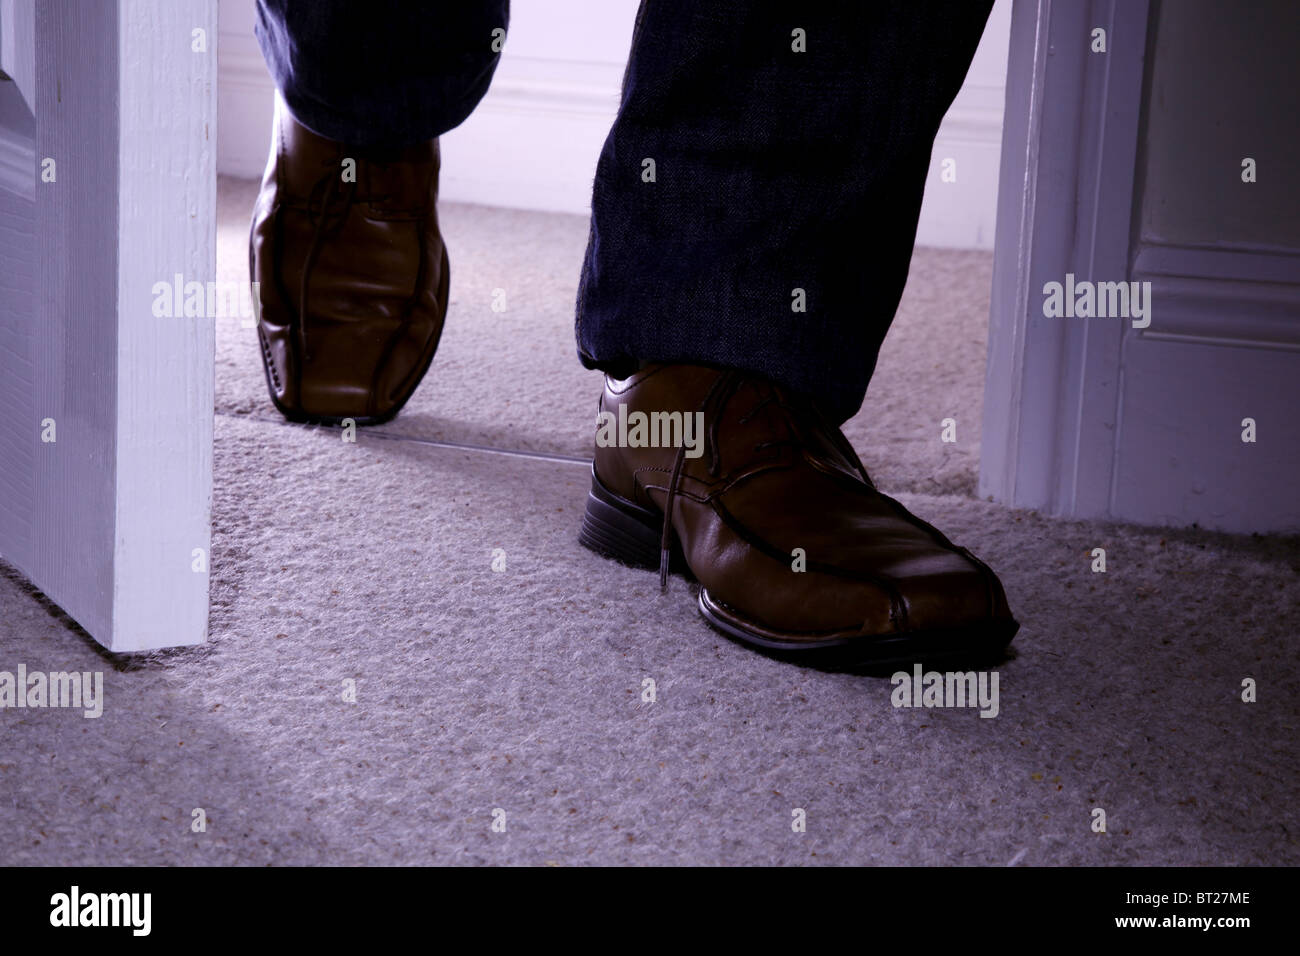 Close up of a man's feet entering a doorway Stock Photo